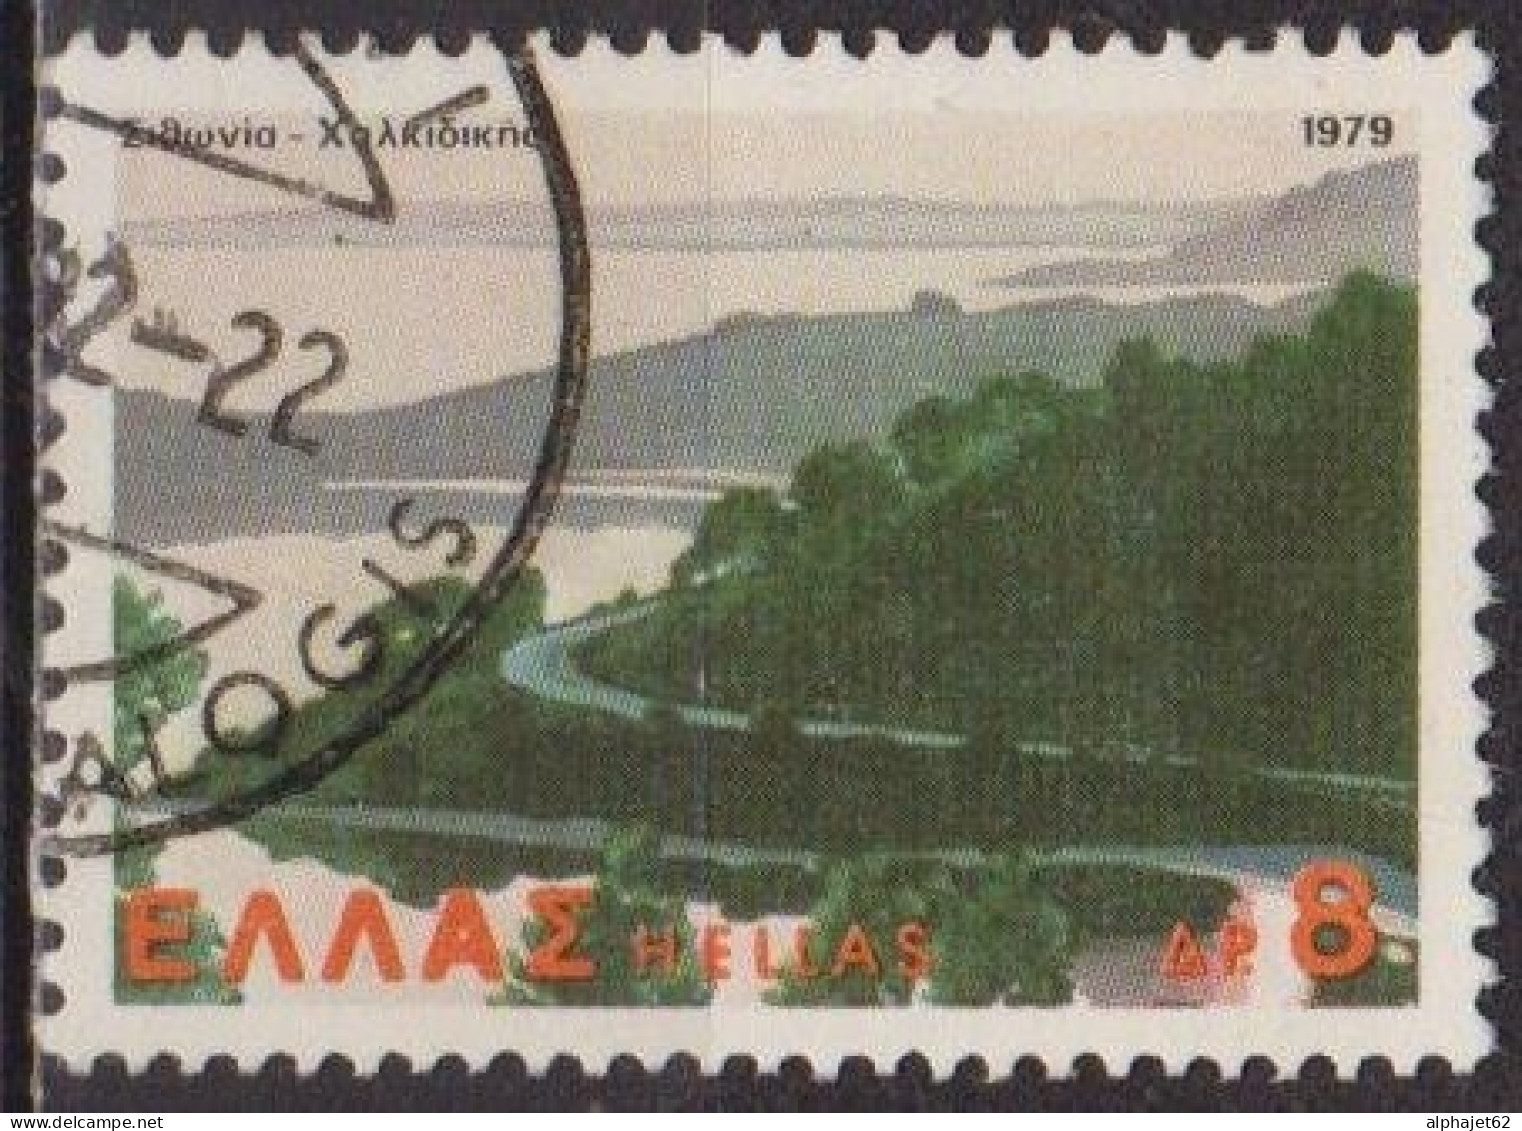 Tourisme - GRECE - Sitonia Chalcidique - N° 1372 - 1979 - Used Stamps